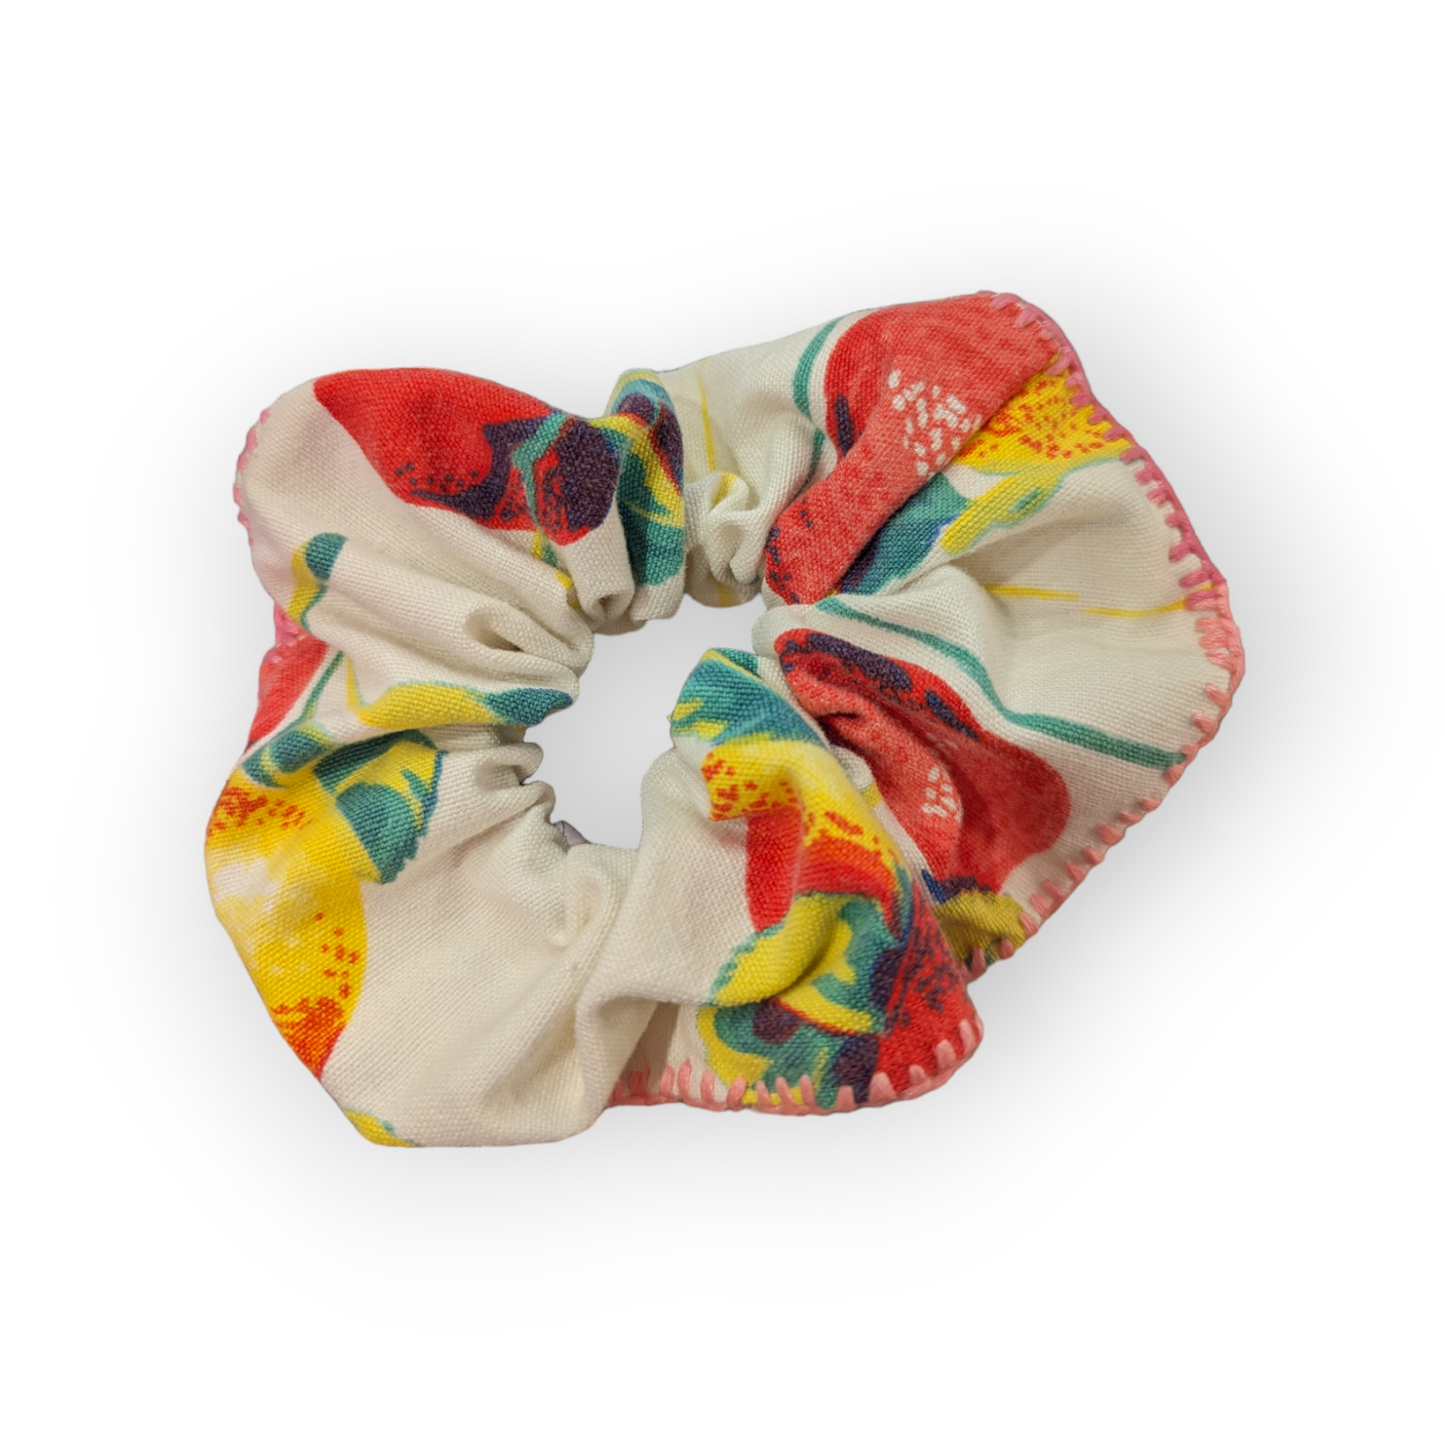 Hand Stitched Scrap Scrunchies by Doll Parts Collective